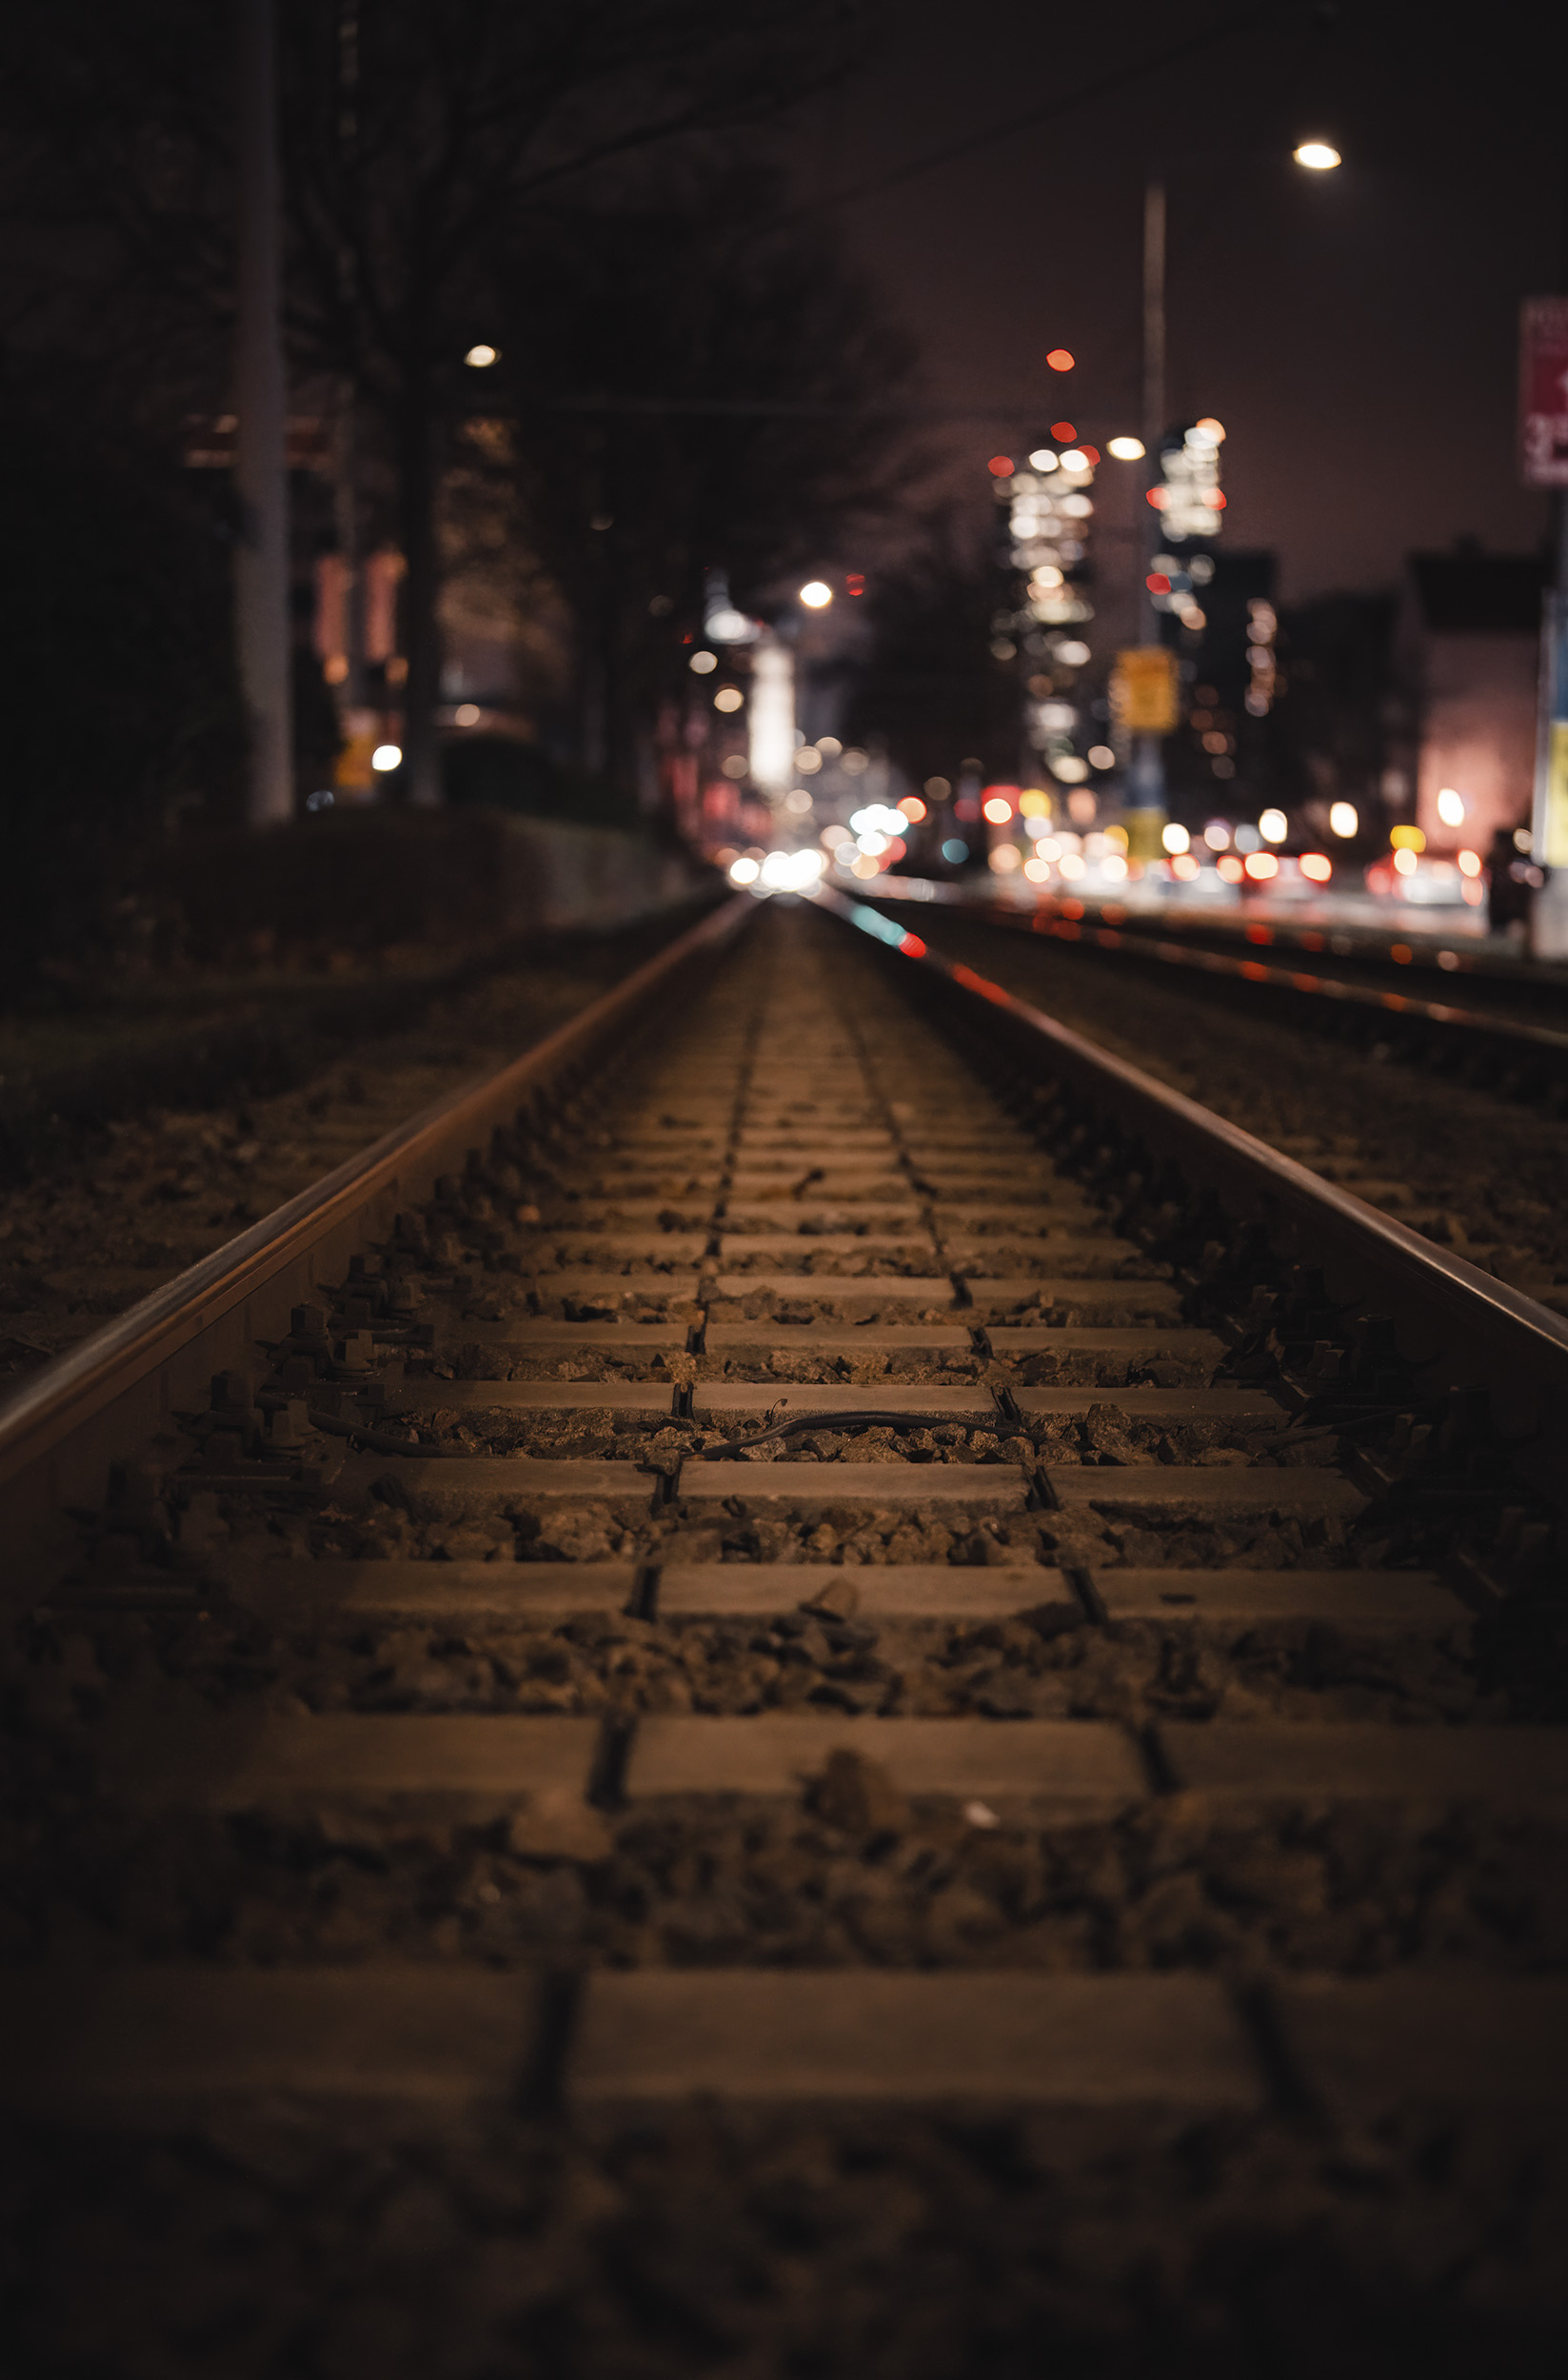 tram-tracks-leading-off-into-the-distance-at-night.jpg